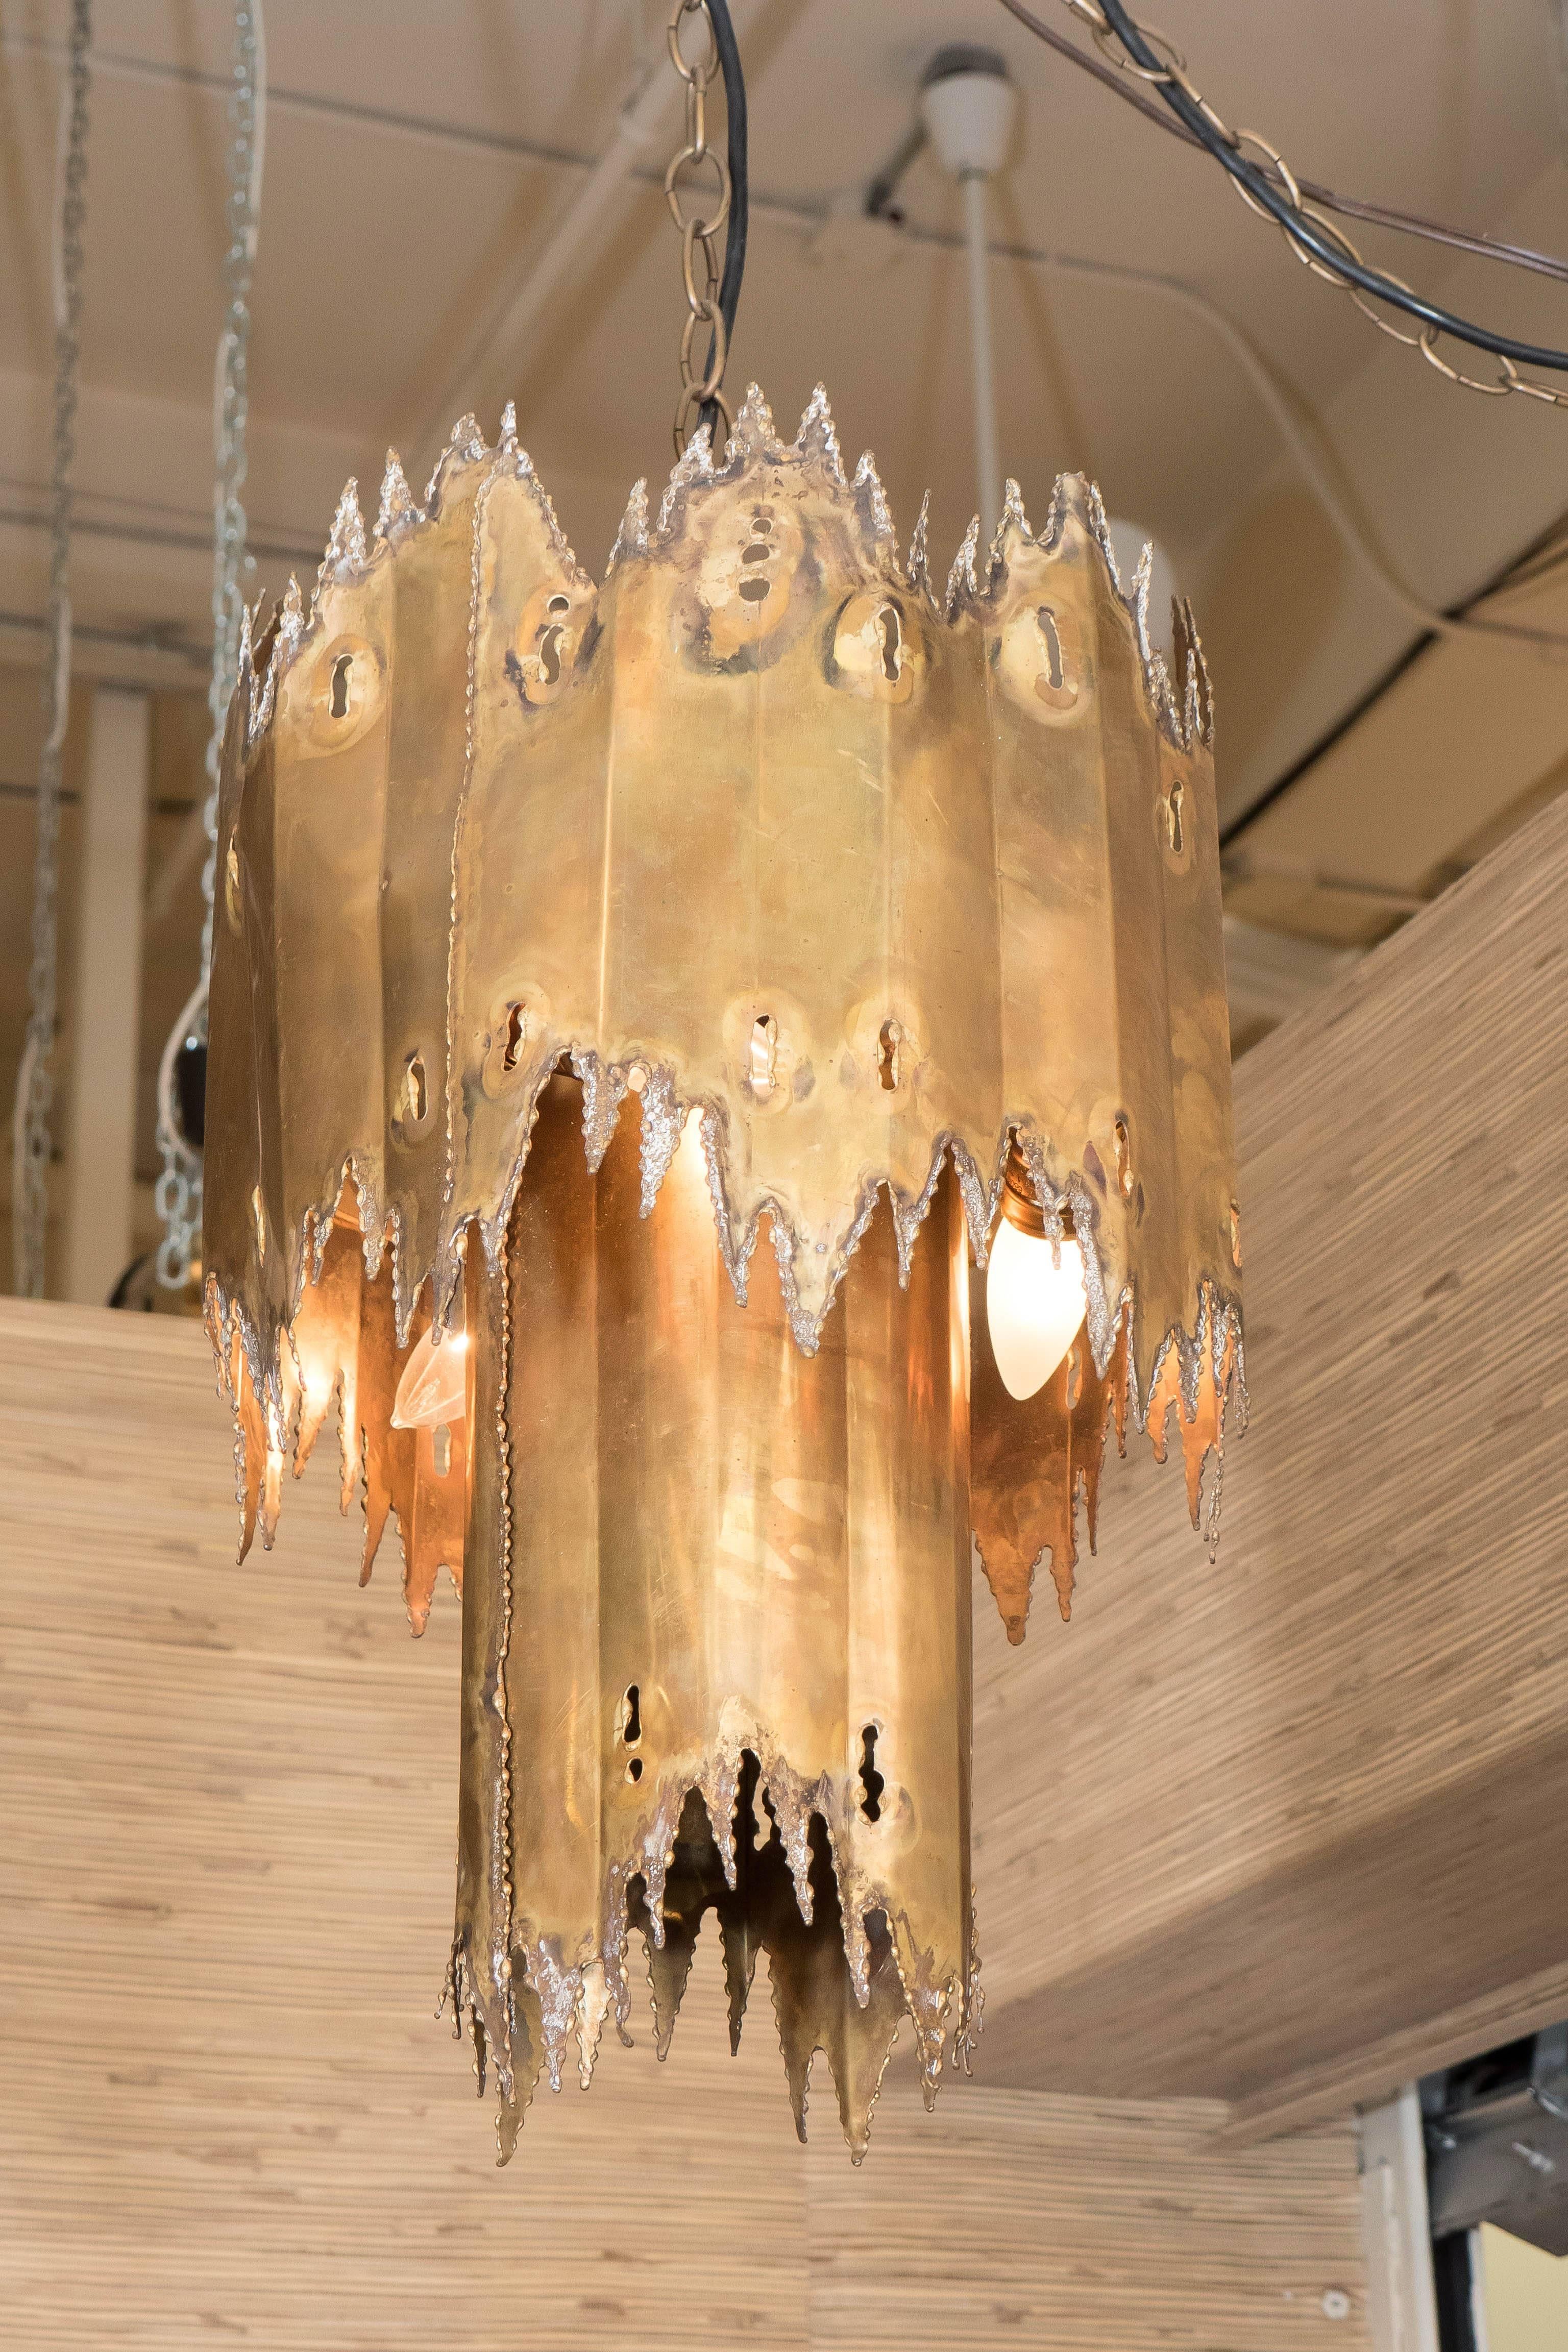 A contemporary chandelier in the Brutalist style, composed of two tiers of artfully torched and soldered sheets of metal as shades. Very good condition, consistent with age and prior use.